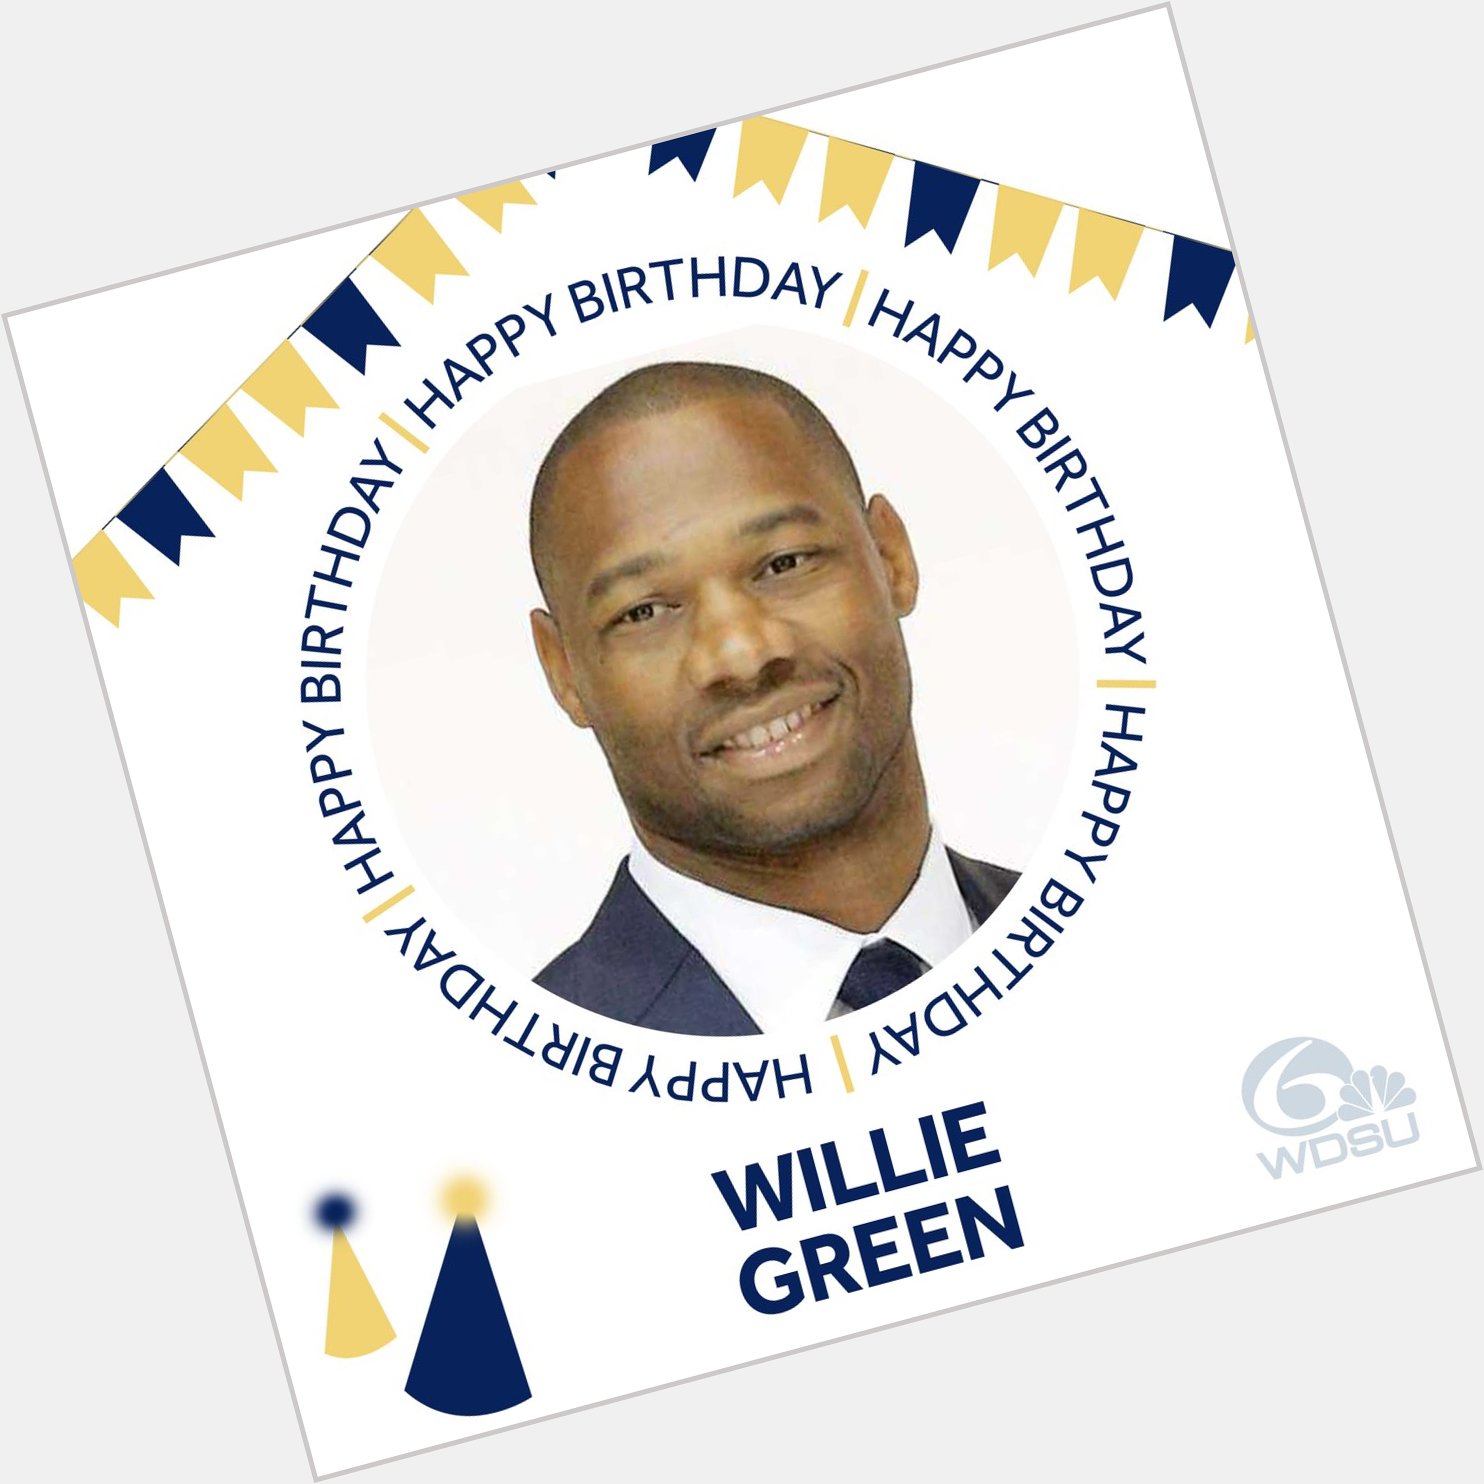 Everyone wish the New Orleans Pelicans head coach Willie Green a VERY Happy Birthday today! He turned 40 today! 